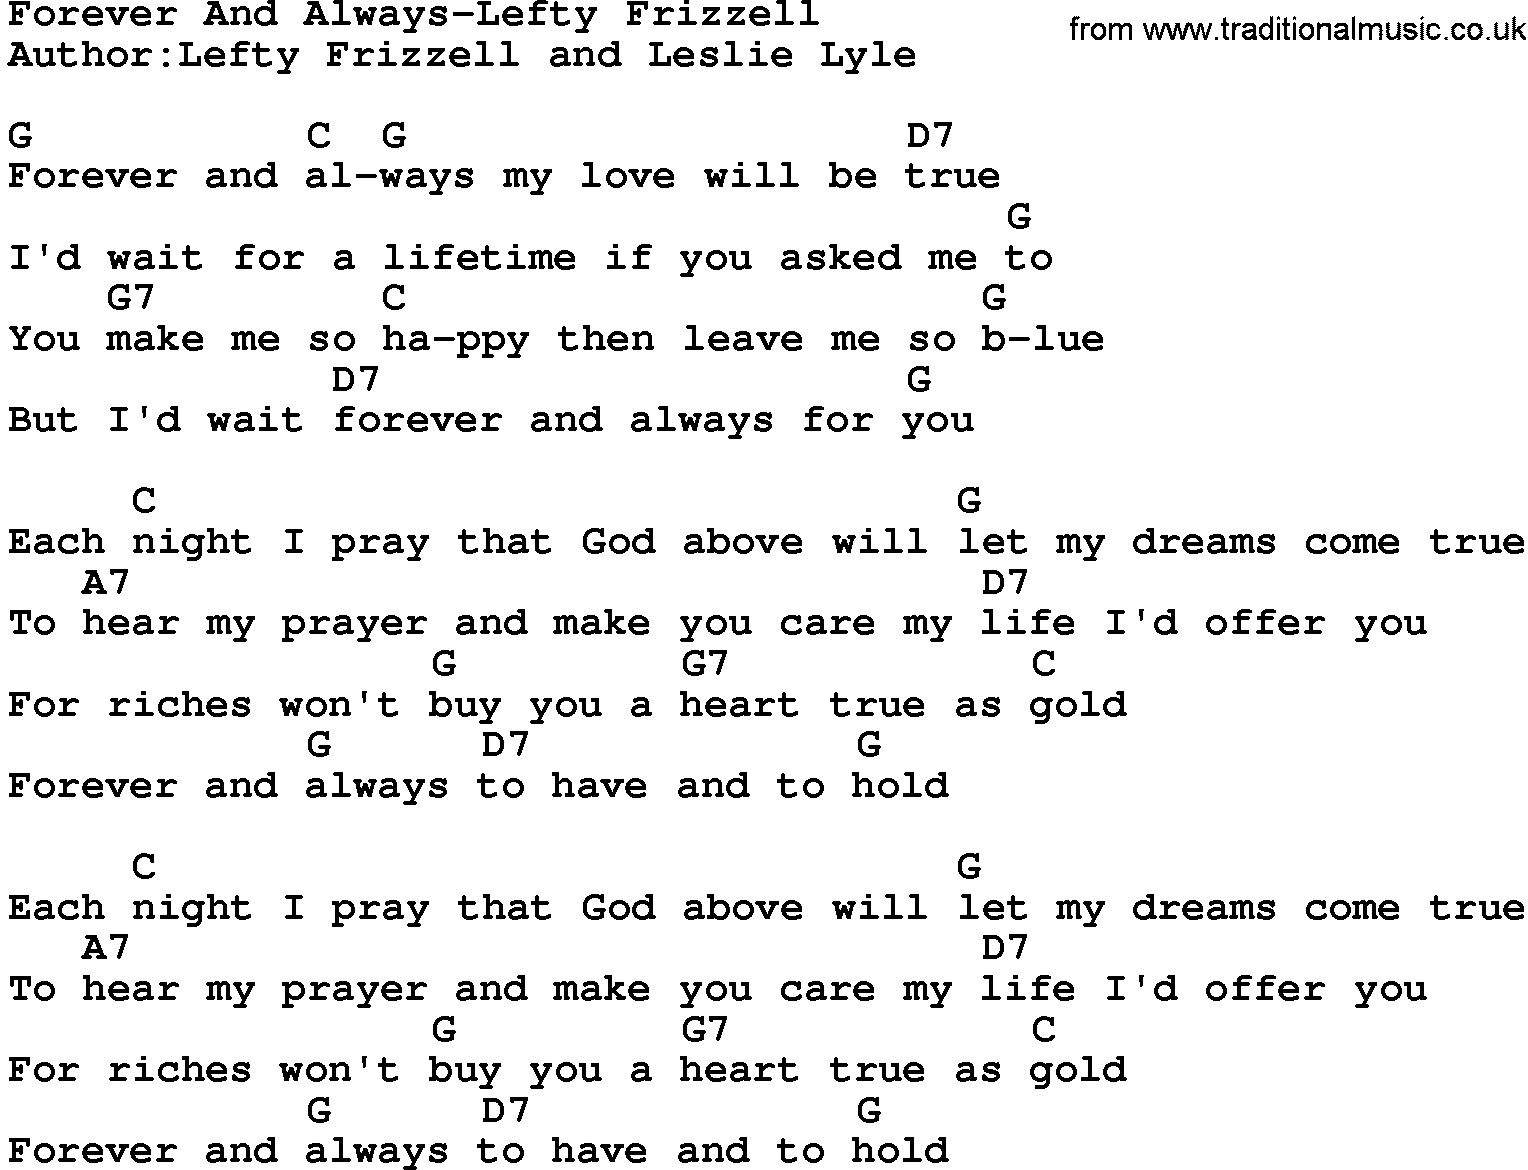 Country music song: Forever And Always-Lefty Frizzell lyrics and chords